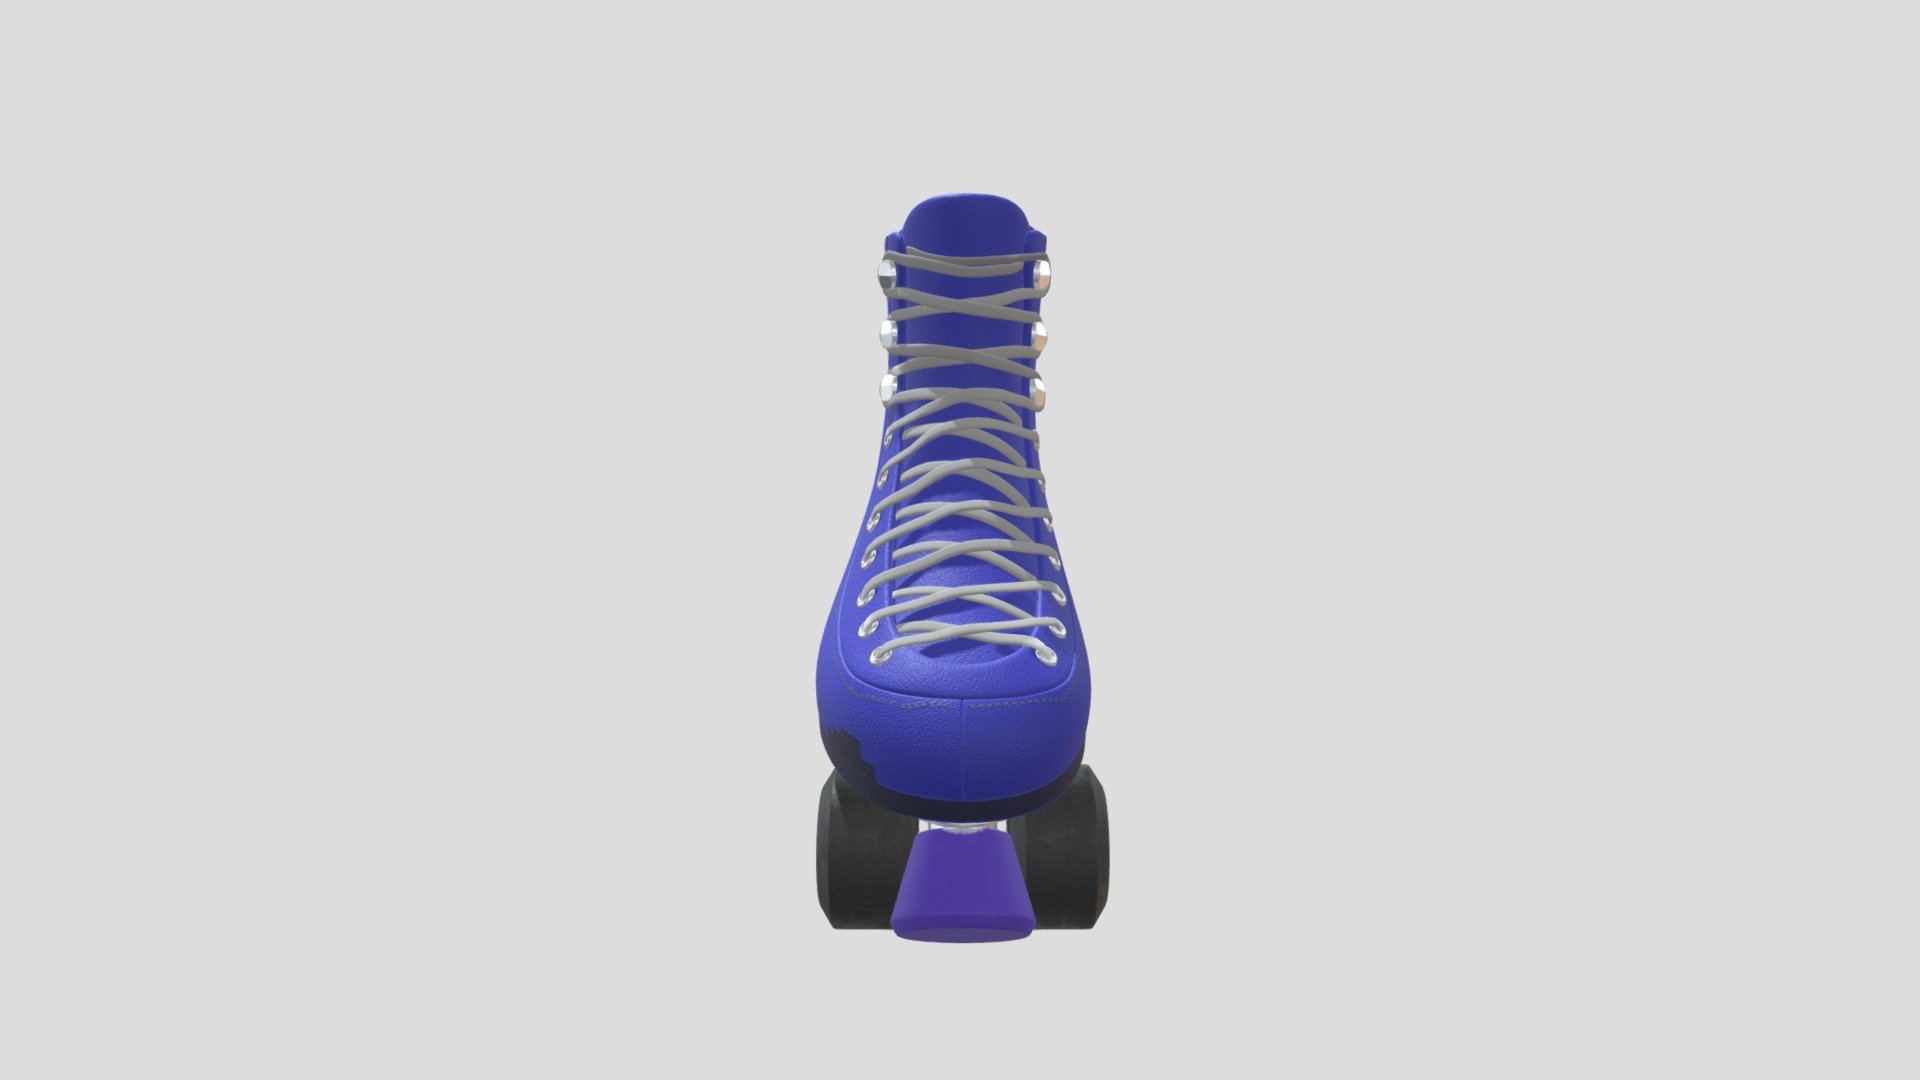 Assignment10-300193163-RollerSkate - 3D model by liamnichol 3d model